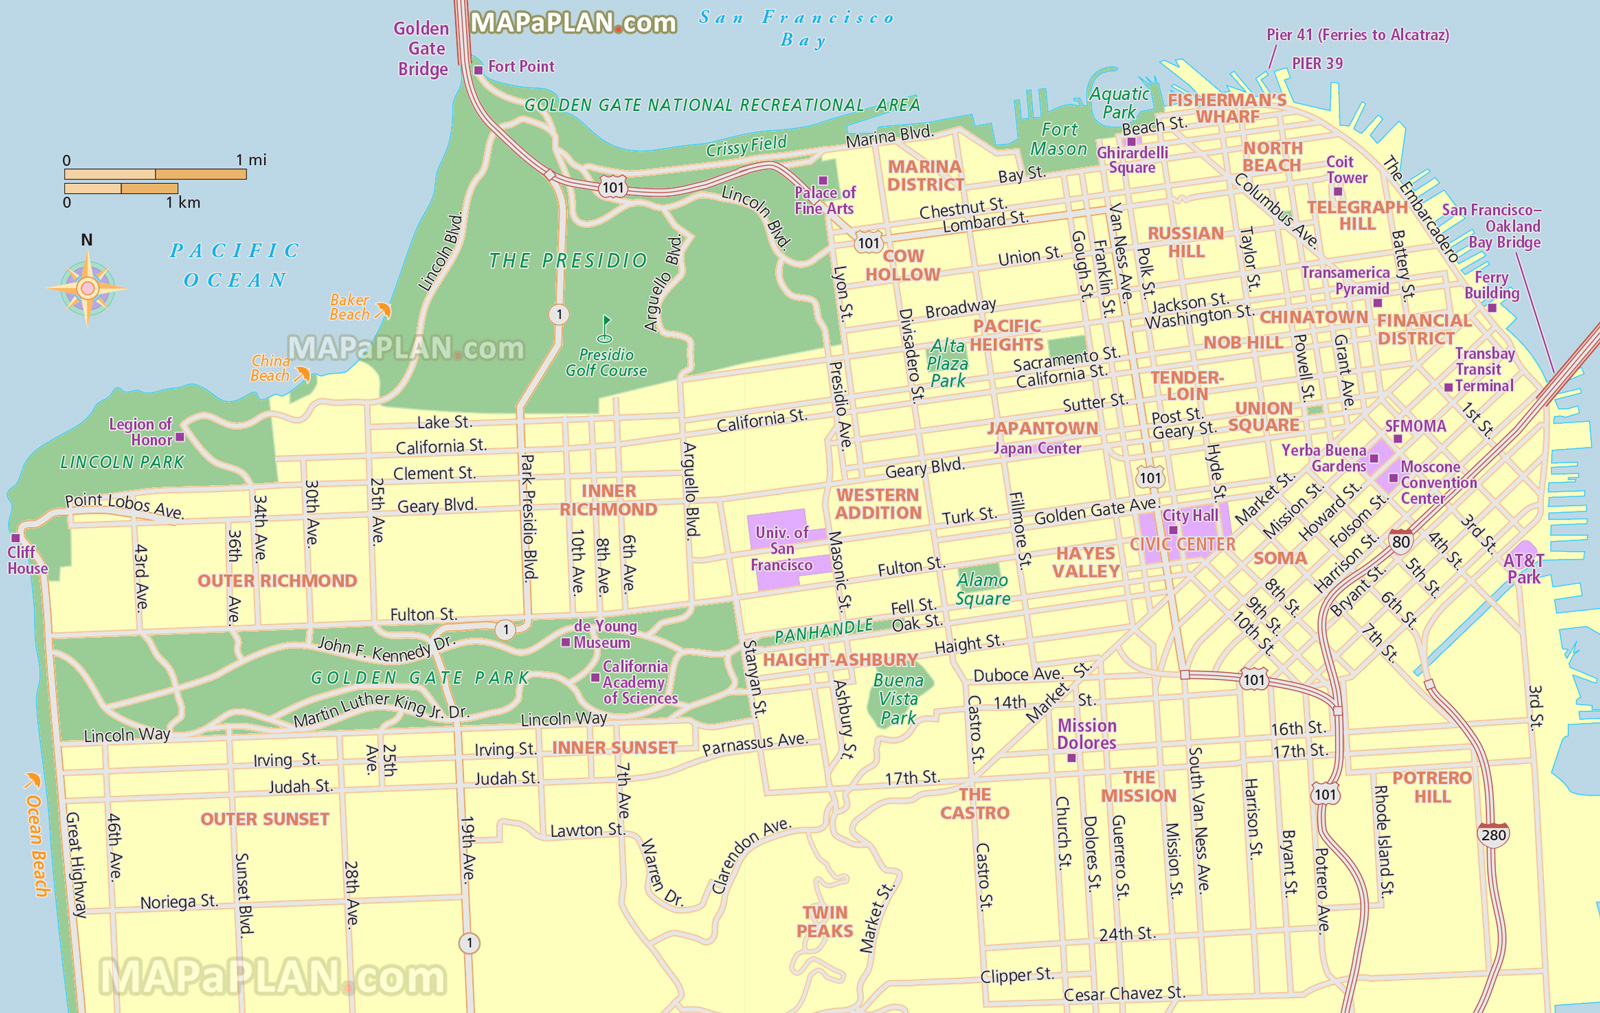 what to see where to go what to do great sites worth visiting castro twin peaks soma San Francisco top tourist attractions map